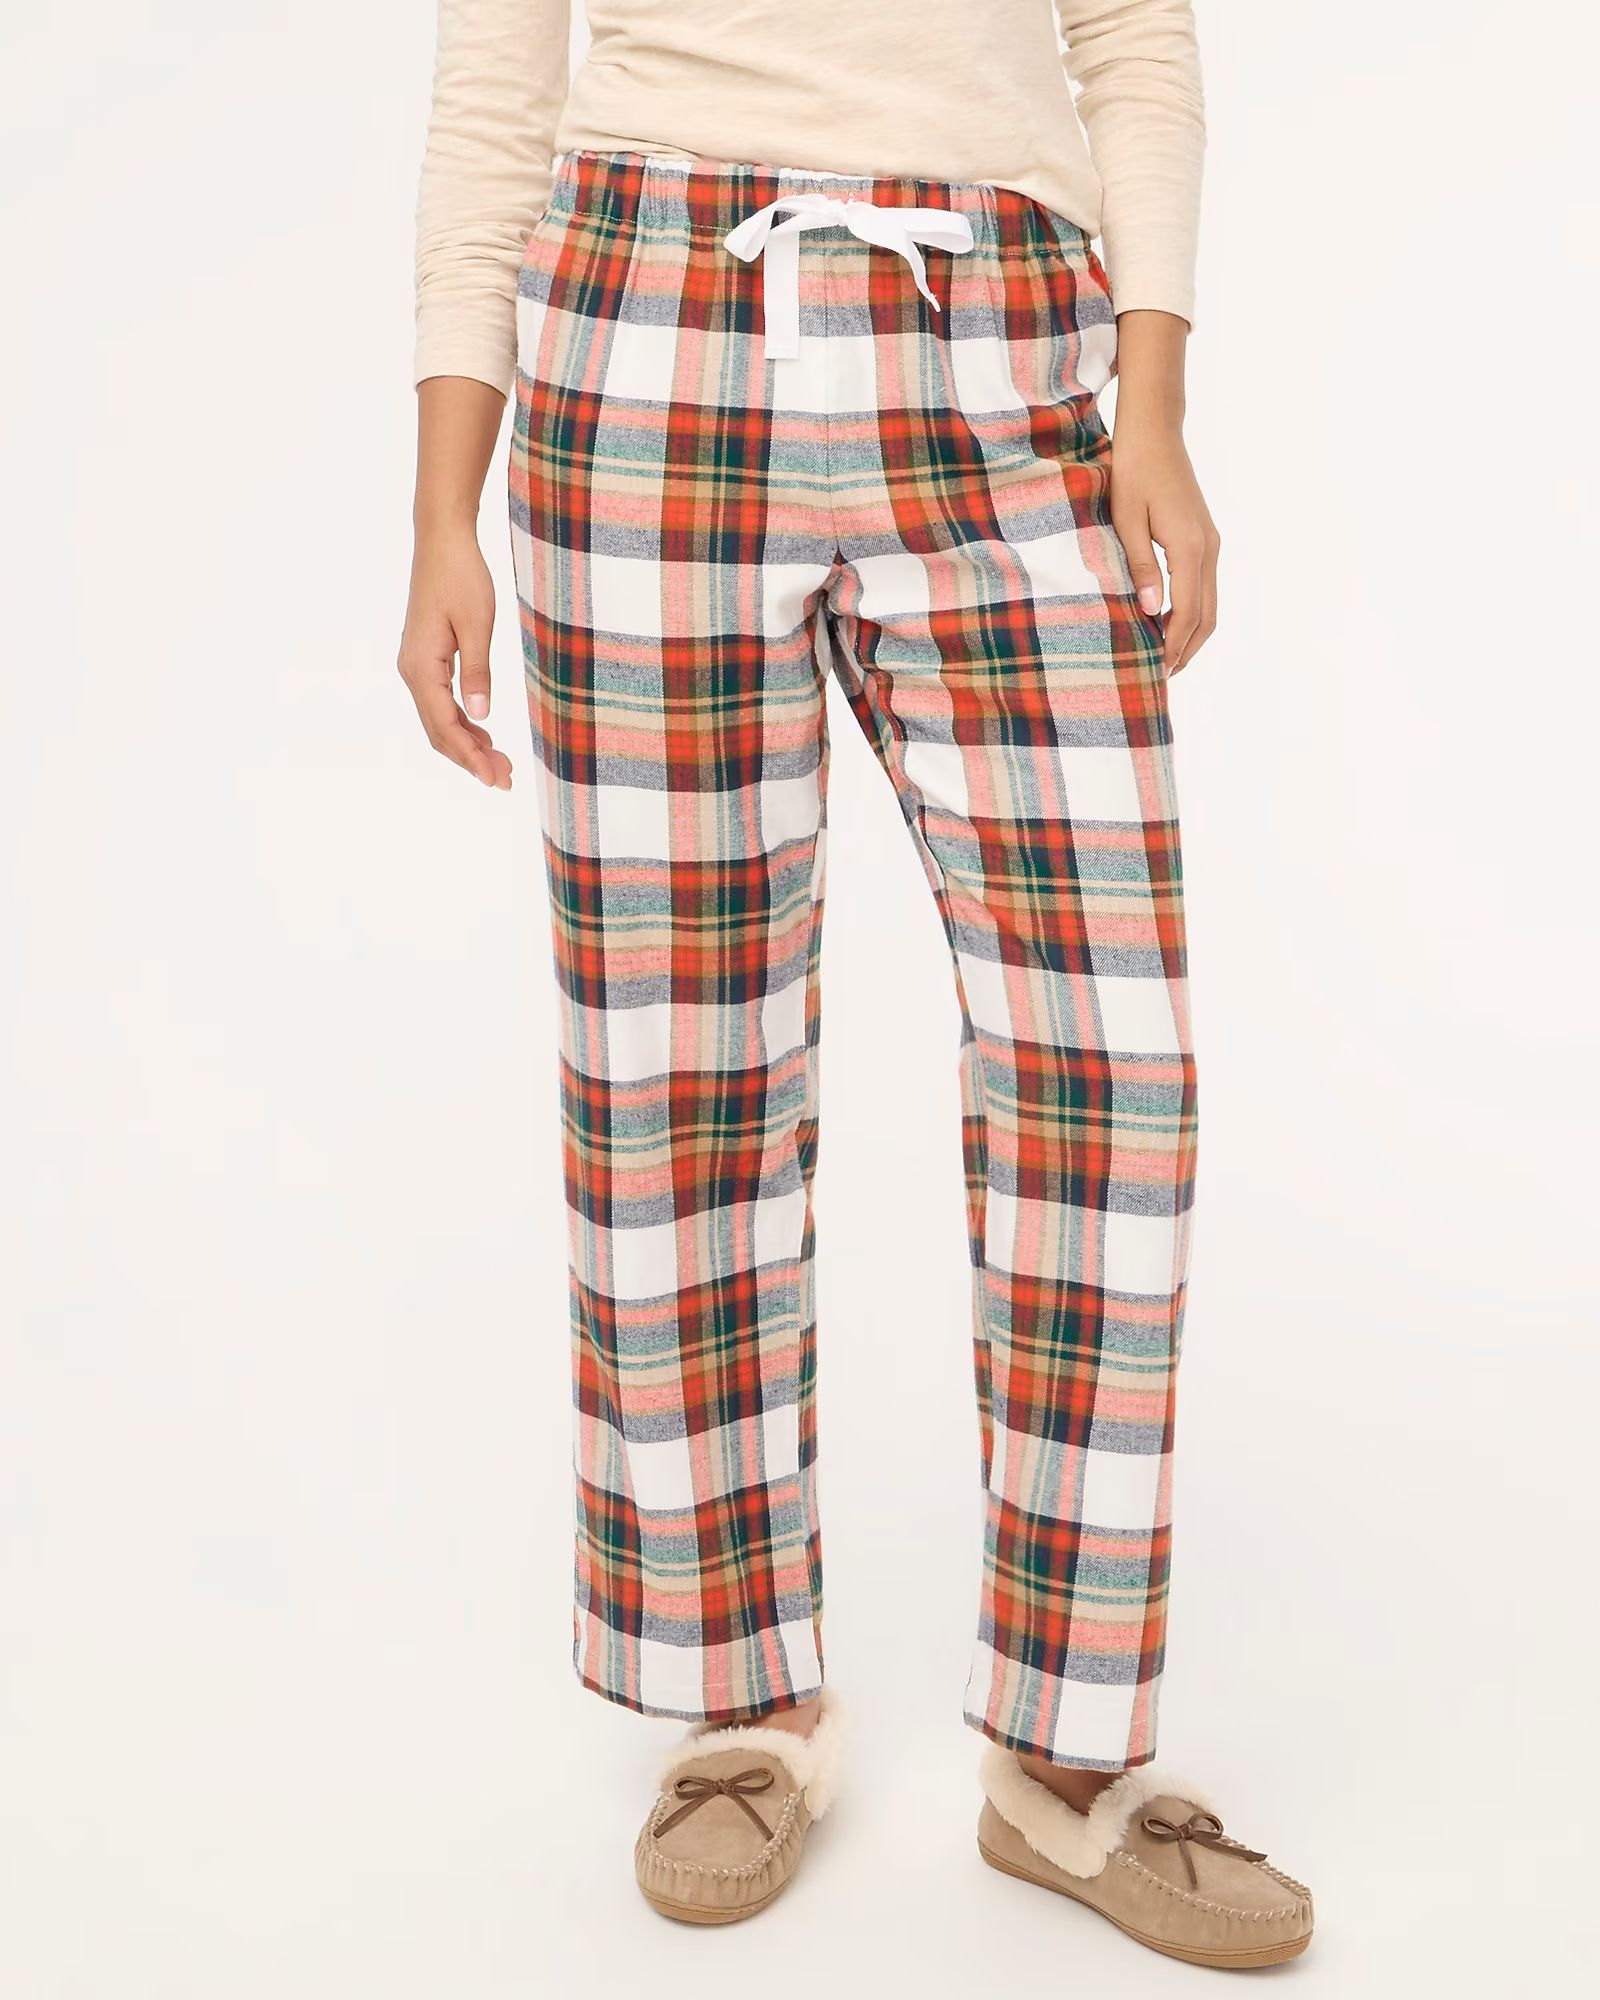 4.4(24 REVIEWS)Printed flannel pajama pant 2319 people looked at this item in the last day | J.Crew Factory